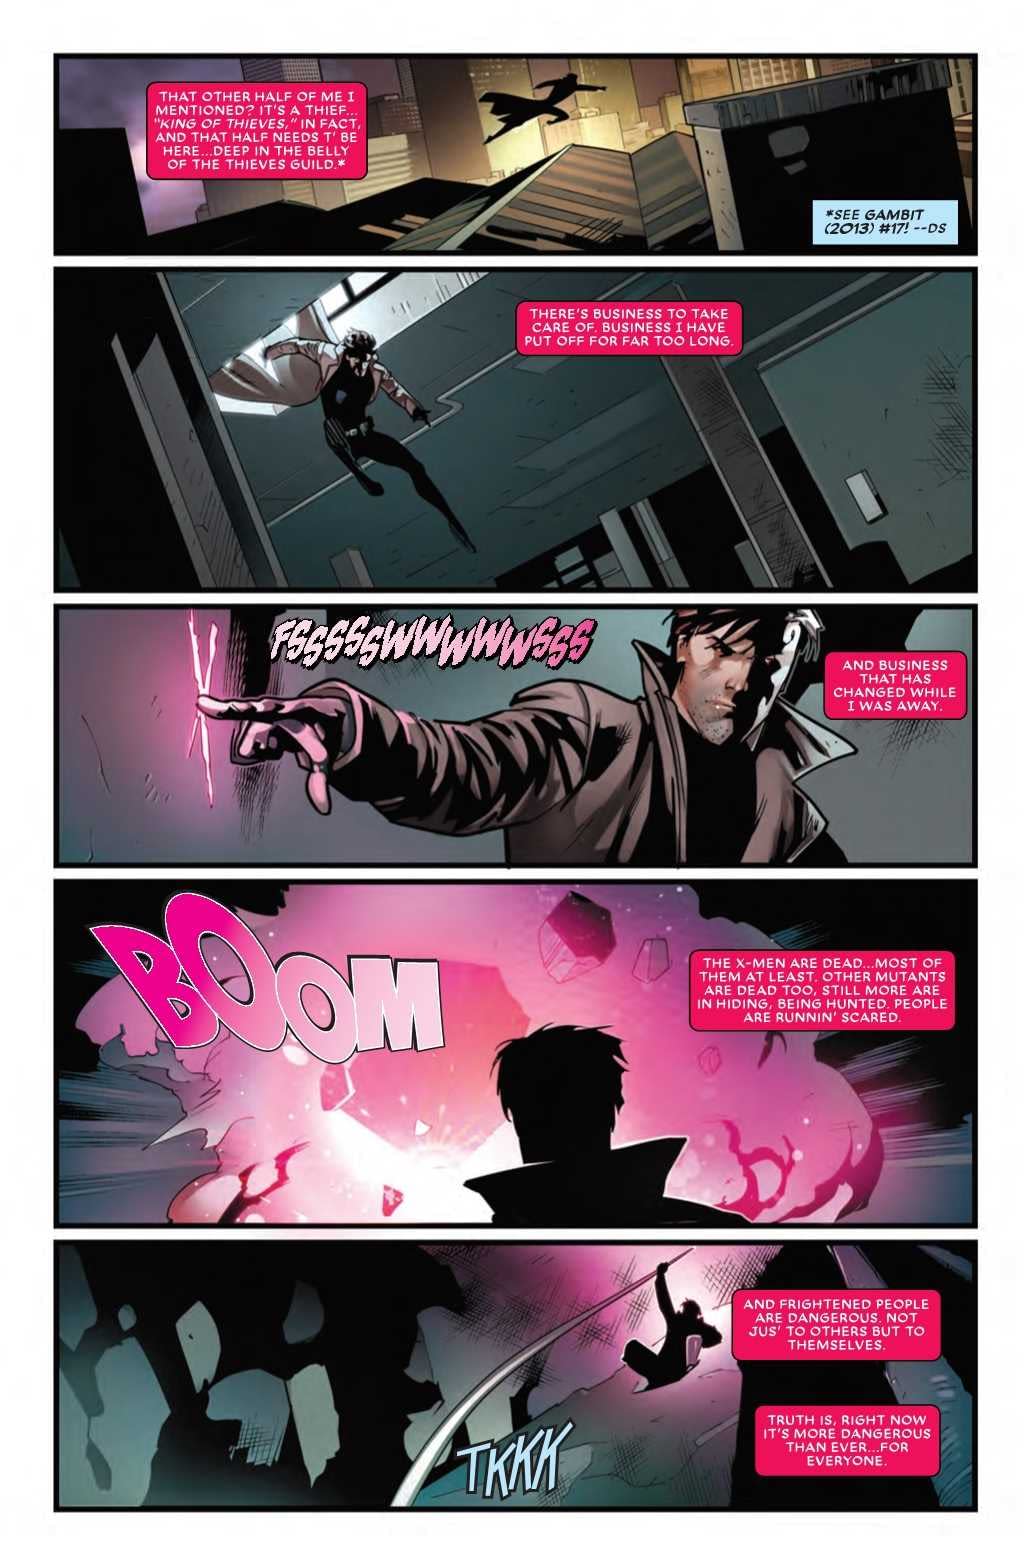 Does Gambit Still Want to Be an X-Man? Mr. and Mrs. X #11 Preview